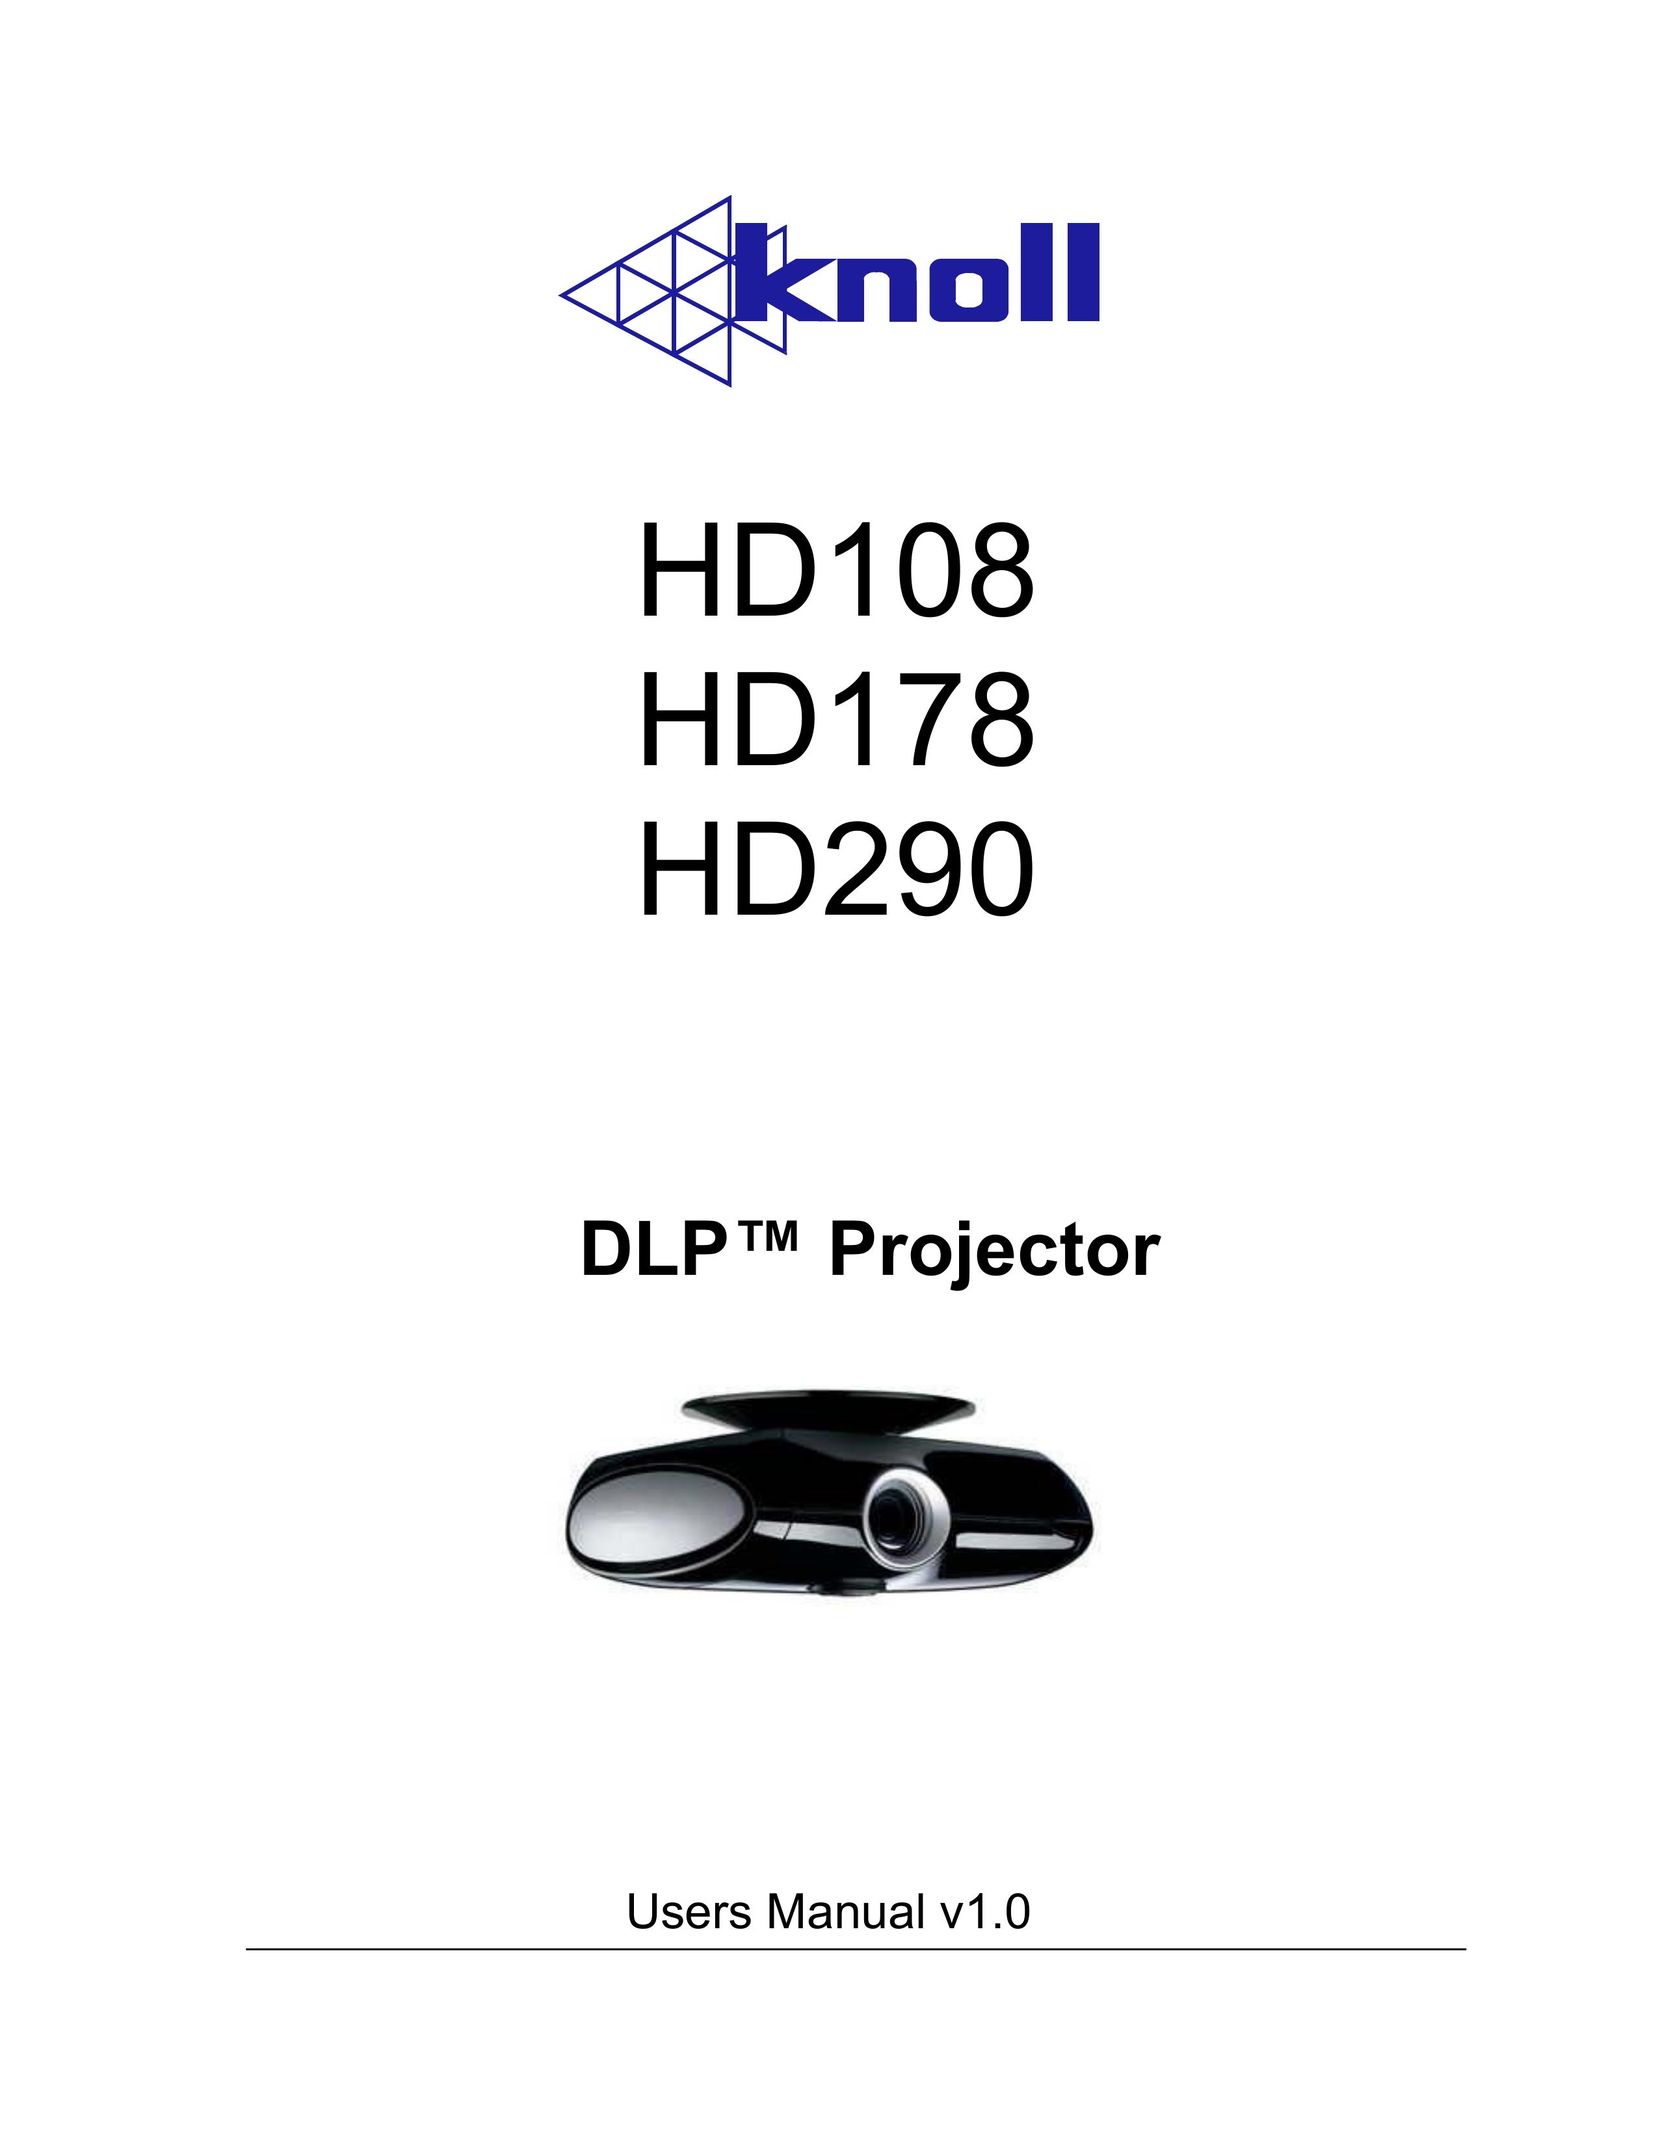 Knoll Systems HD108 Projector User Manual